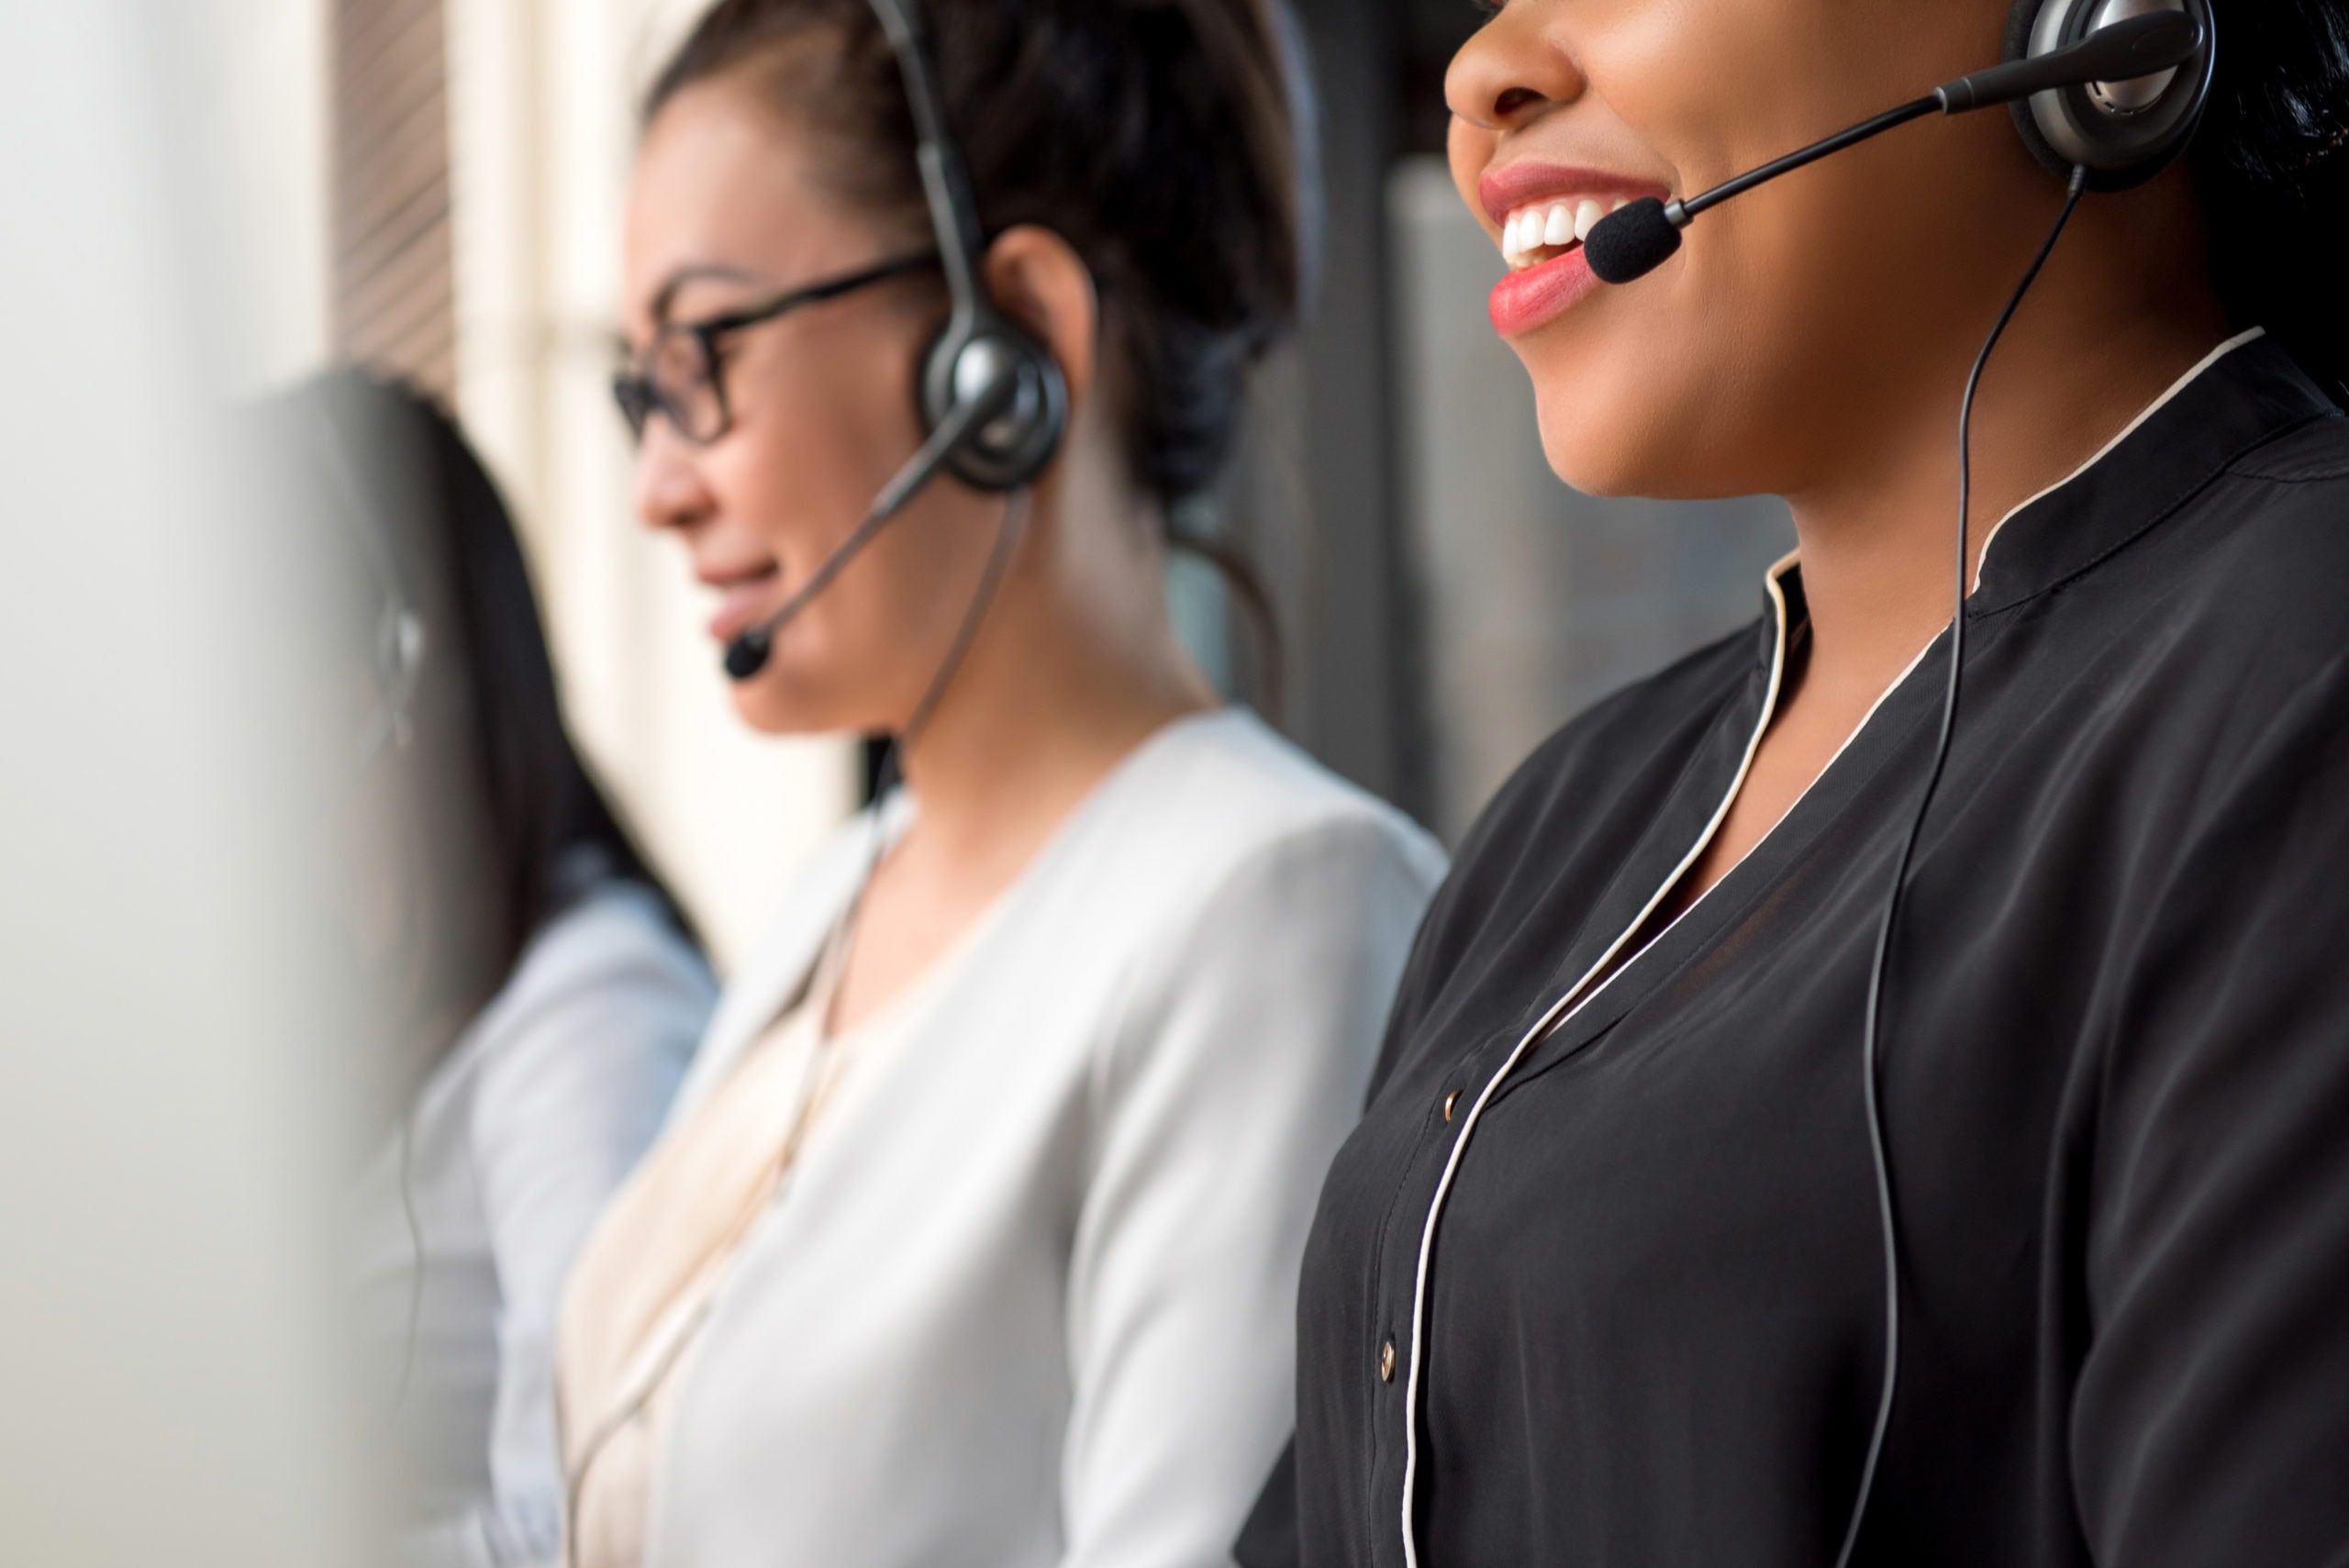 Call Center Employees - Is it Legal to Record Phone Calls?